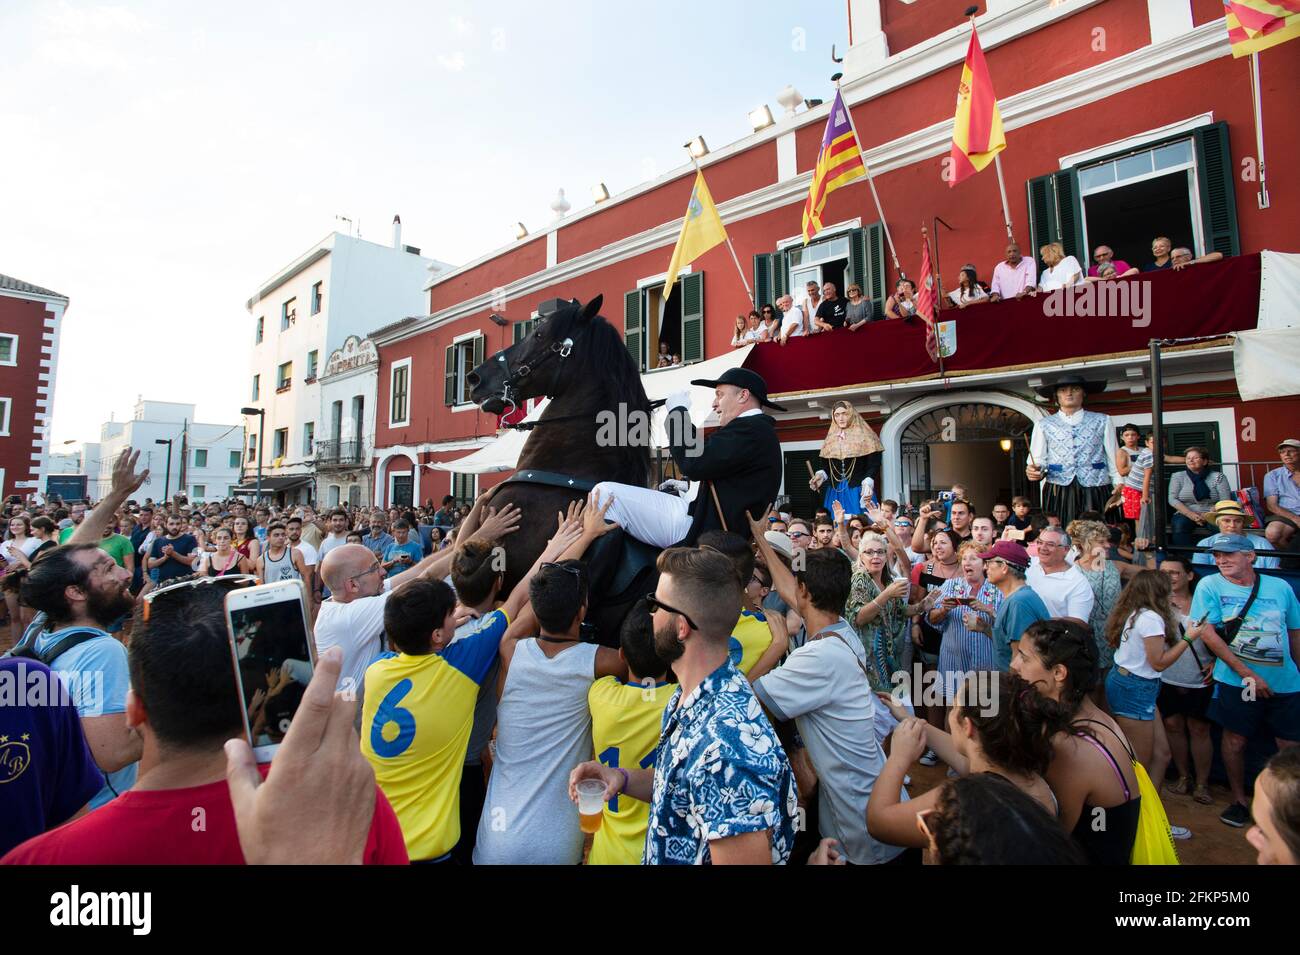 Horses surrounded by festival crowds in es castell during the festival of st joan menorca Stock Photo